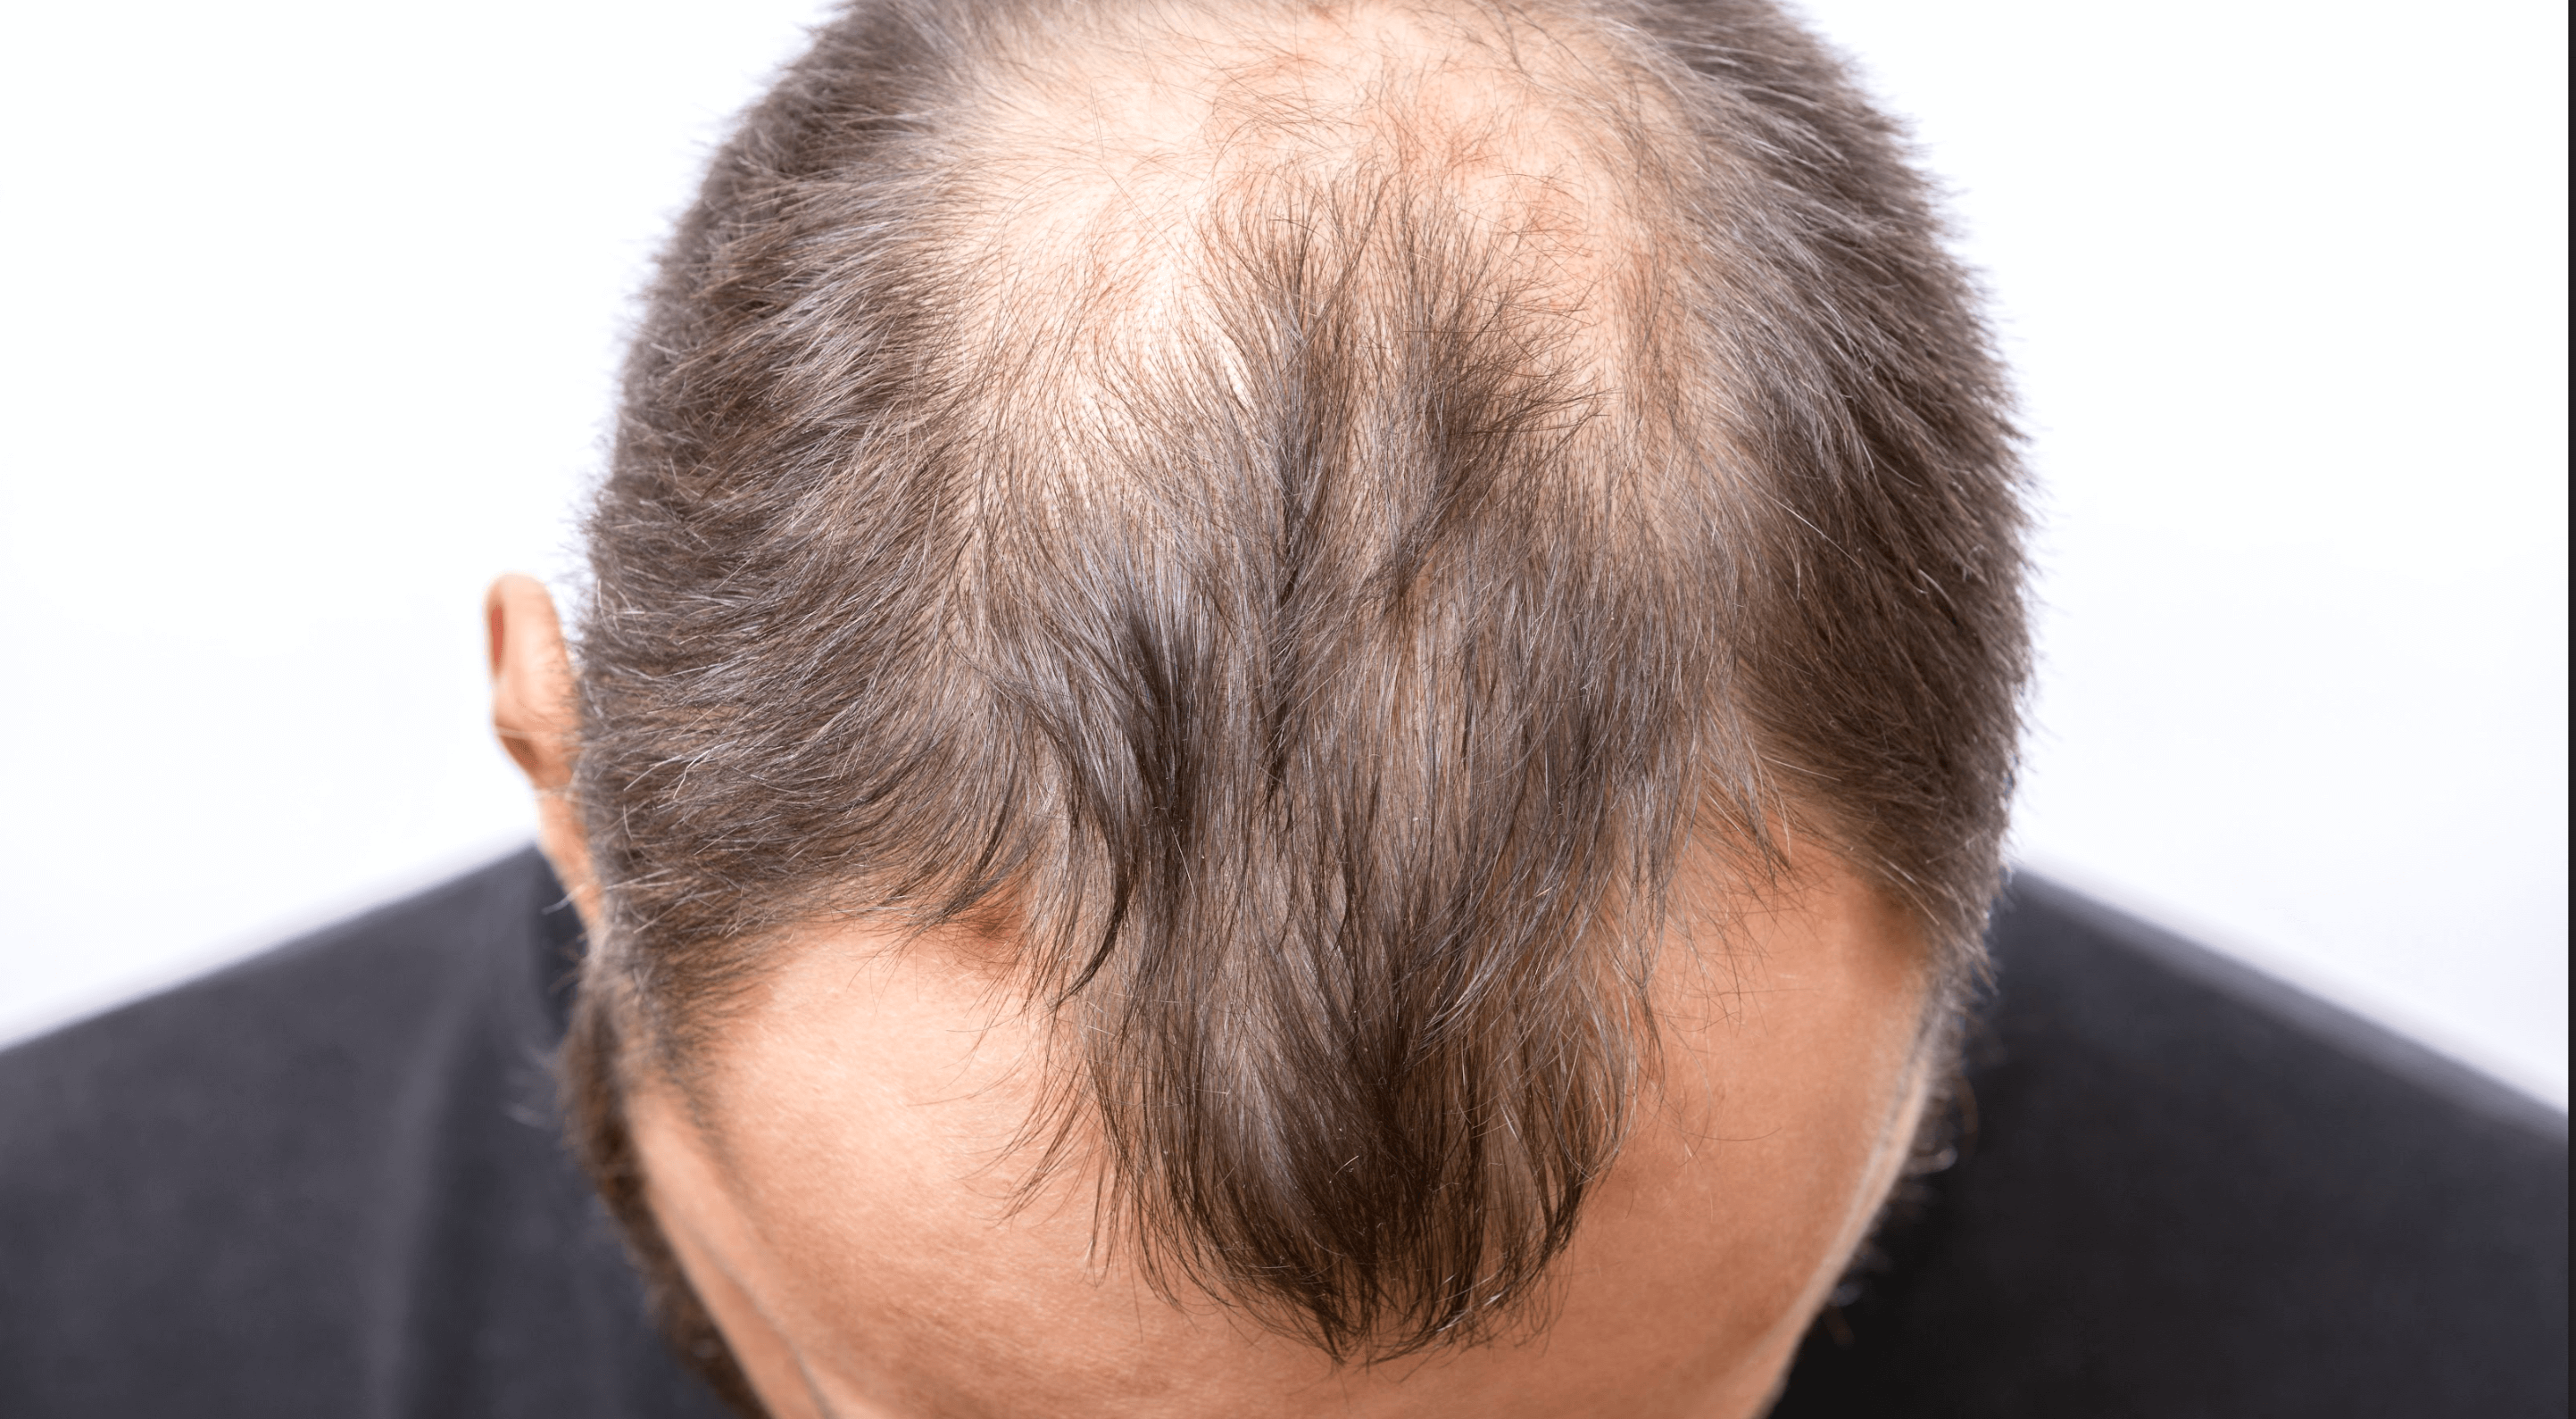 How To Grow Hair On Bald Spot  Treatments And Prevention Tips